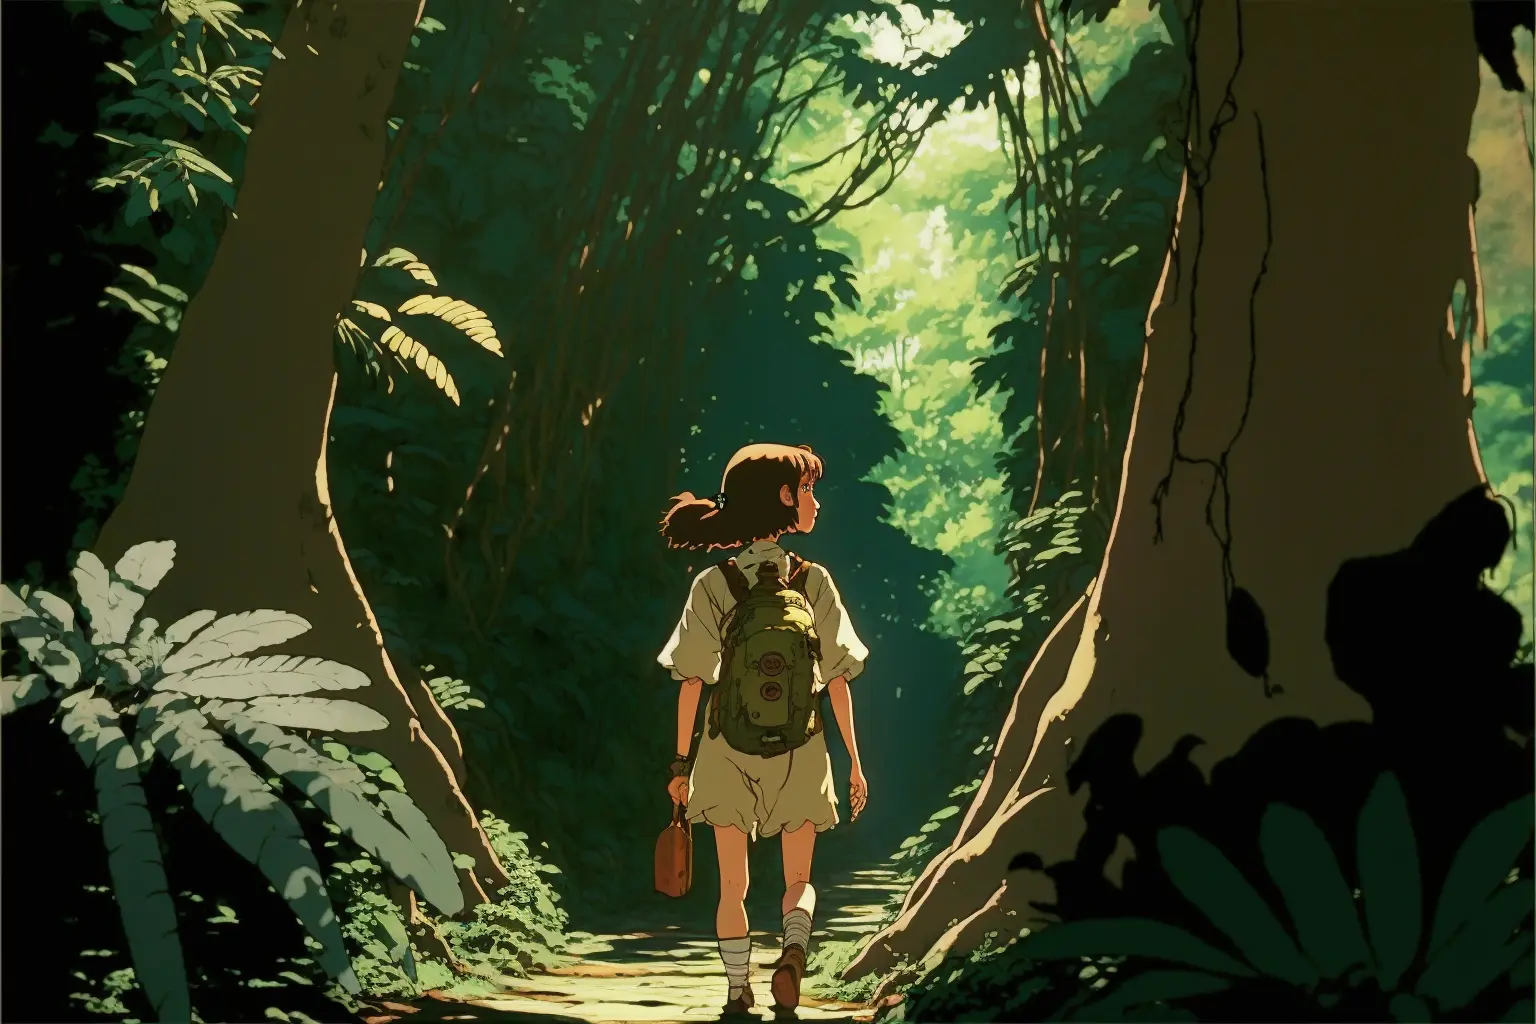 DVD screengrab from studio ghibli movie, female explorer in a dense, jungle, sunlight pouring through the trees, aesthetic, designed by Hayao Miyazaki, retro anime